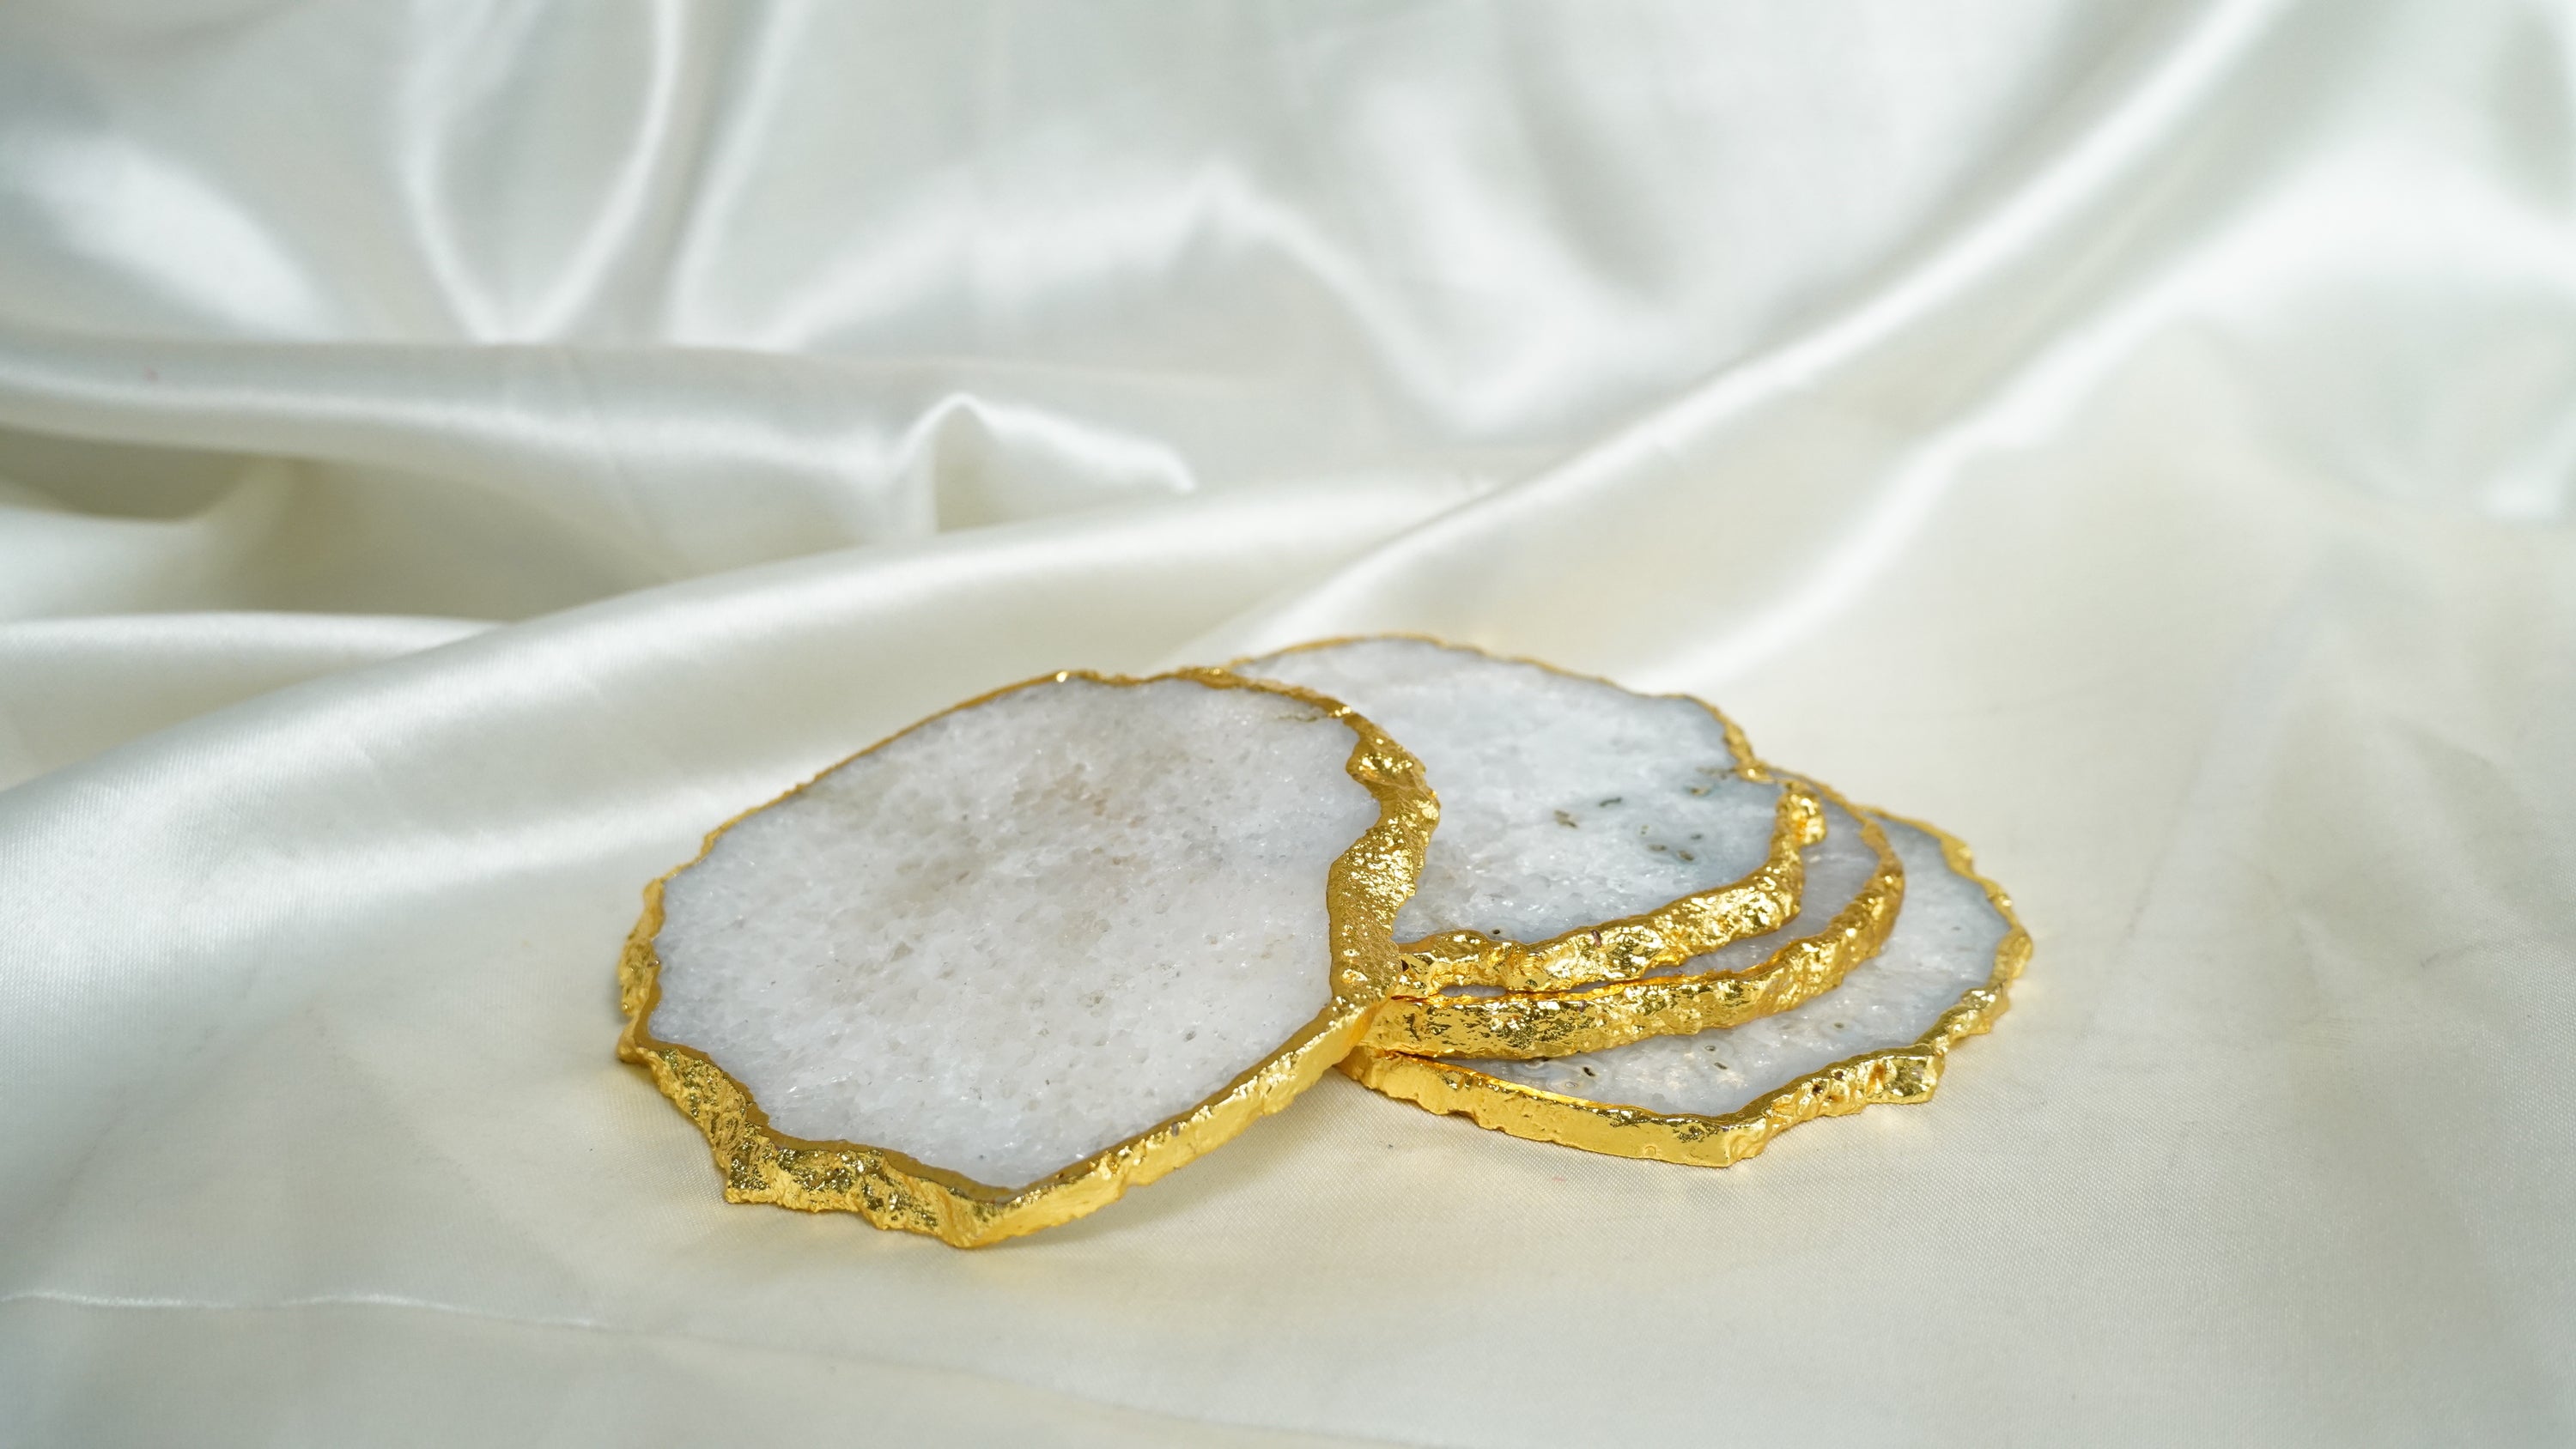 Brunei BIBELOT Agate Handcrafted Luxury Gold Plated Coaster (Natural, Marble White)